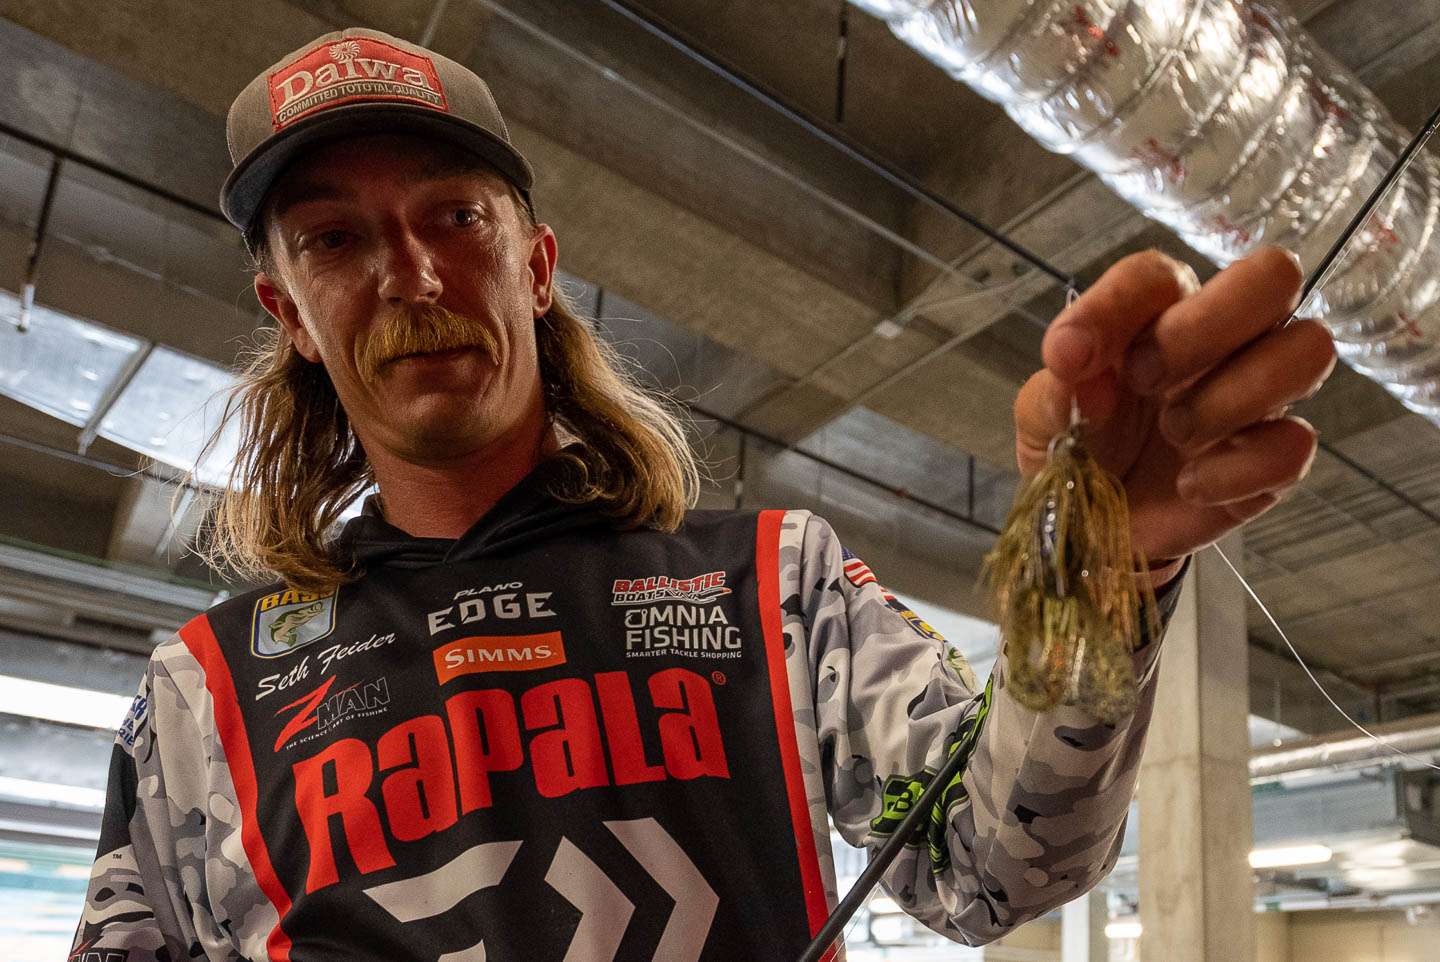 <b>Seth Feider (25th 26-9)</b><br>
Seth Feider used a signature series bait as his primary lure for Ray Roberts. 